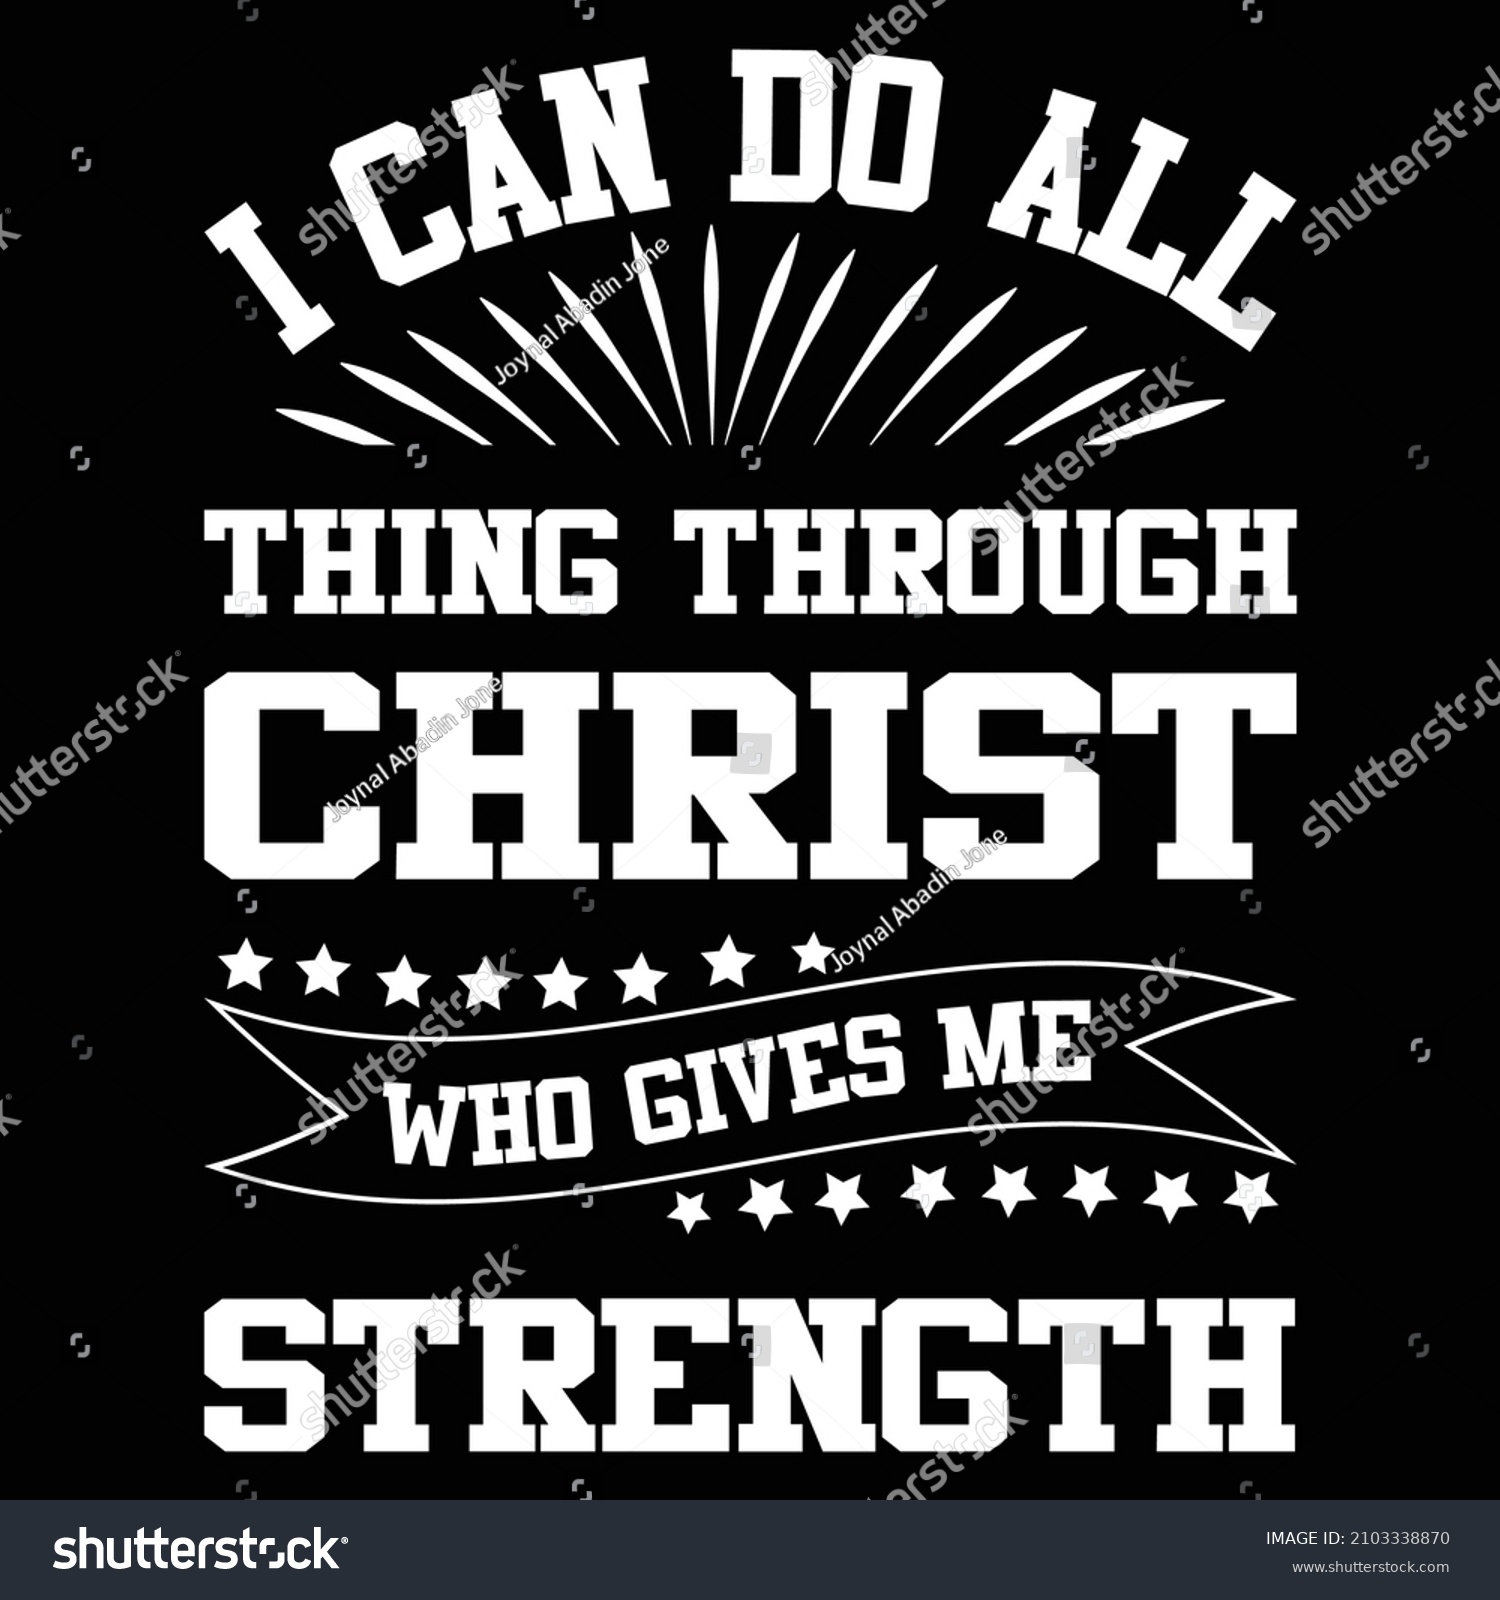 SVG of I CAN DO ALL THING THROUGH CHRIST WHO GIVES ME STRENGTH svg